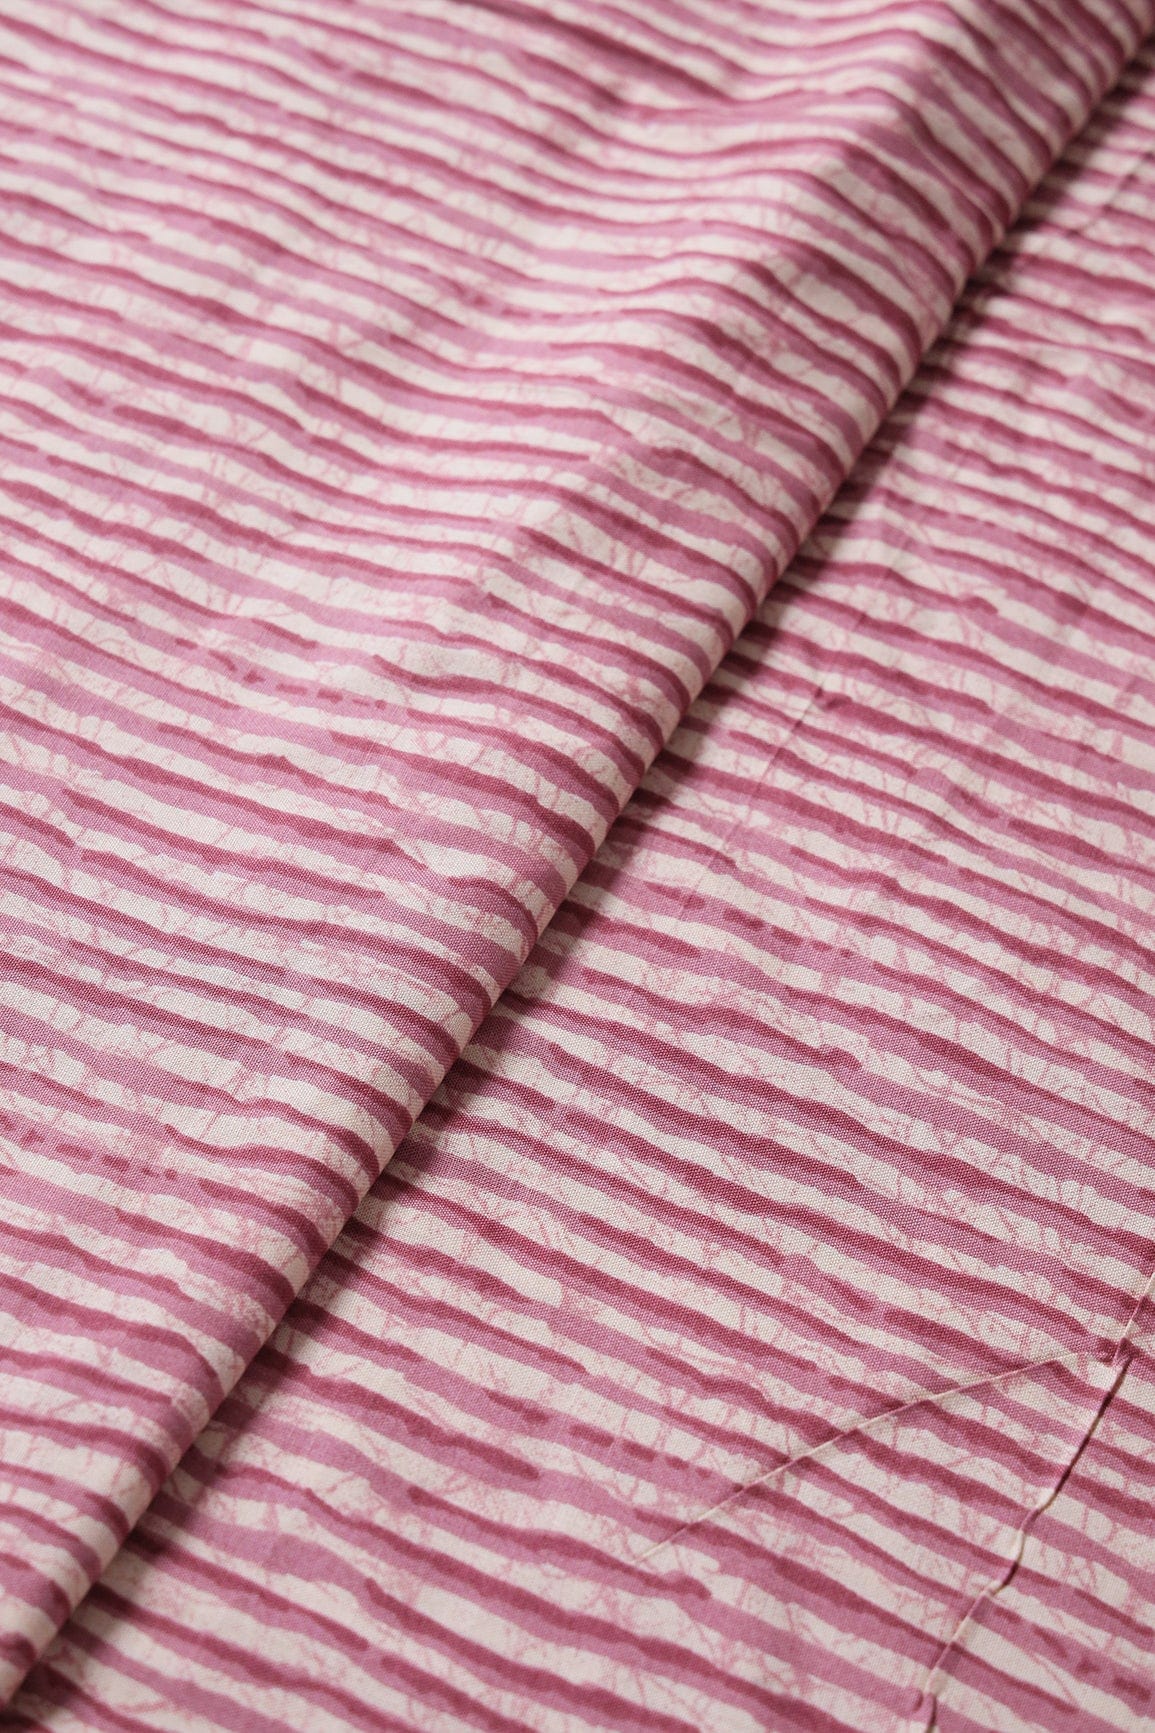 doeraa Prints Lavender Pink And Cream Stripes Print On Pure Rayon Fabric